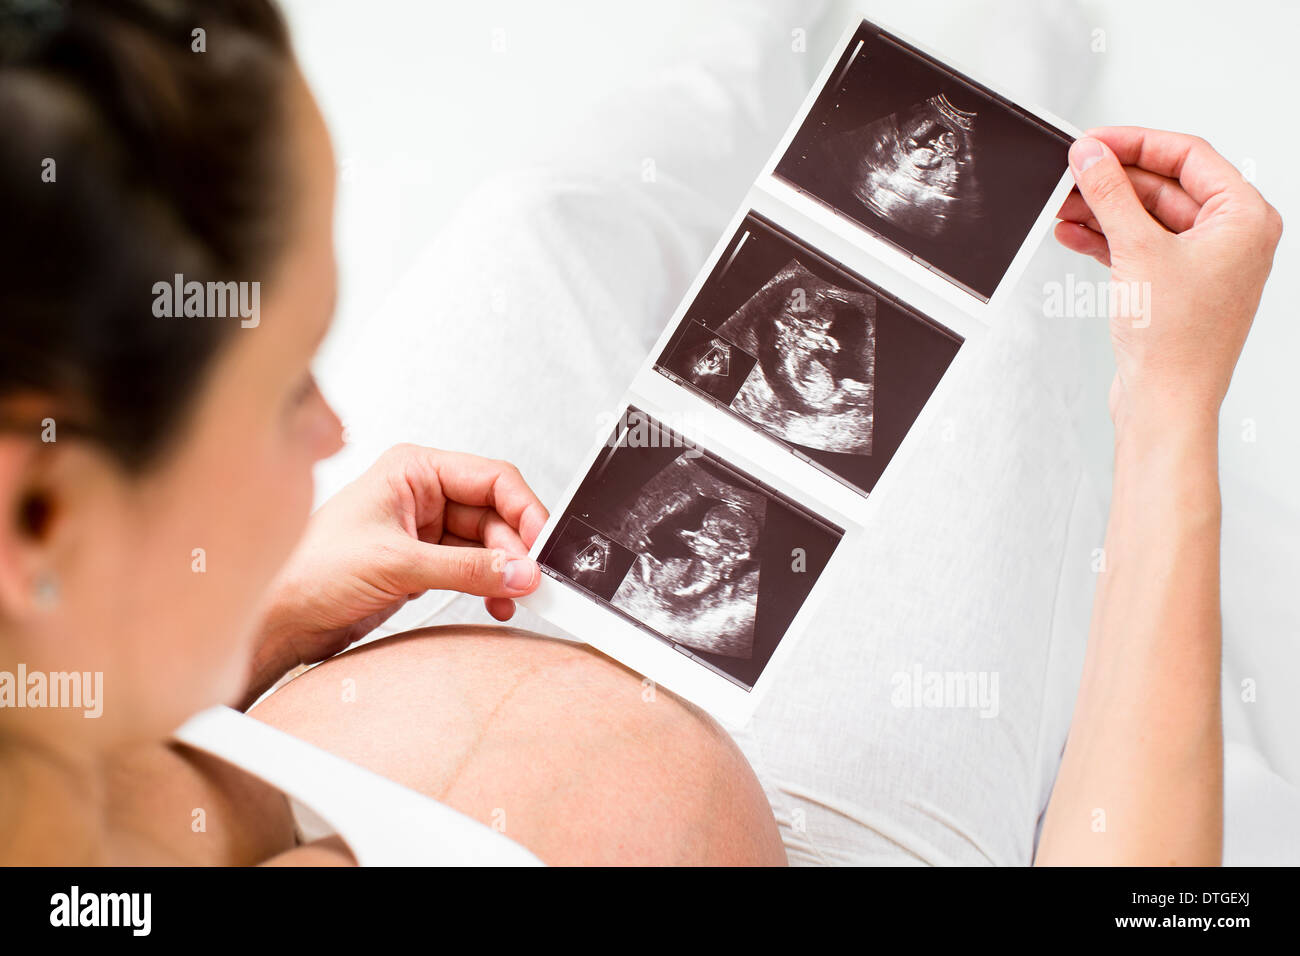 Pregnant woman reviewing baby ultrasound scan Stock Photo